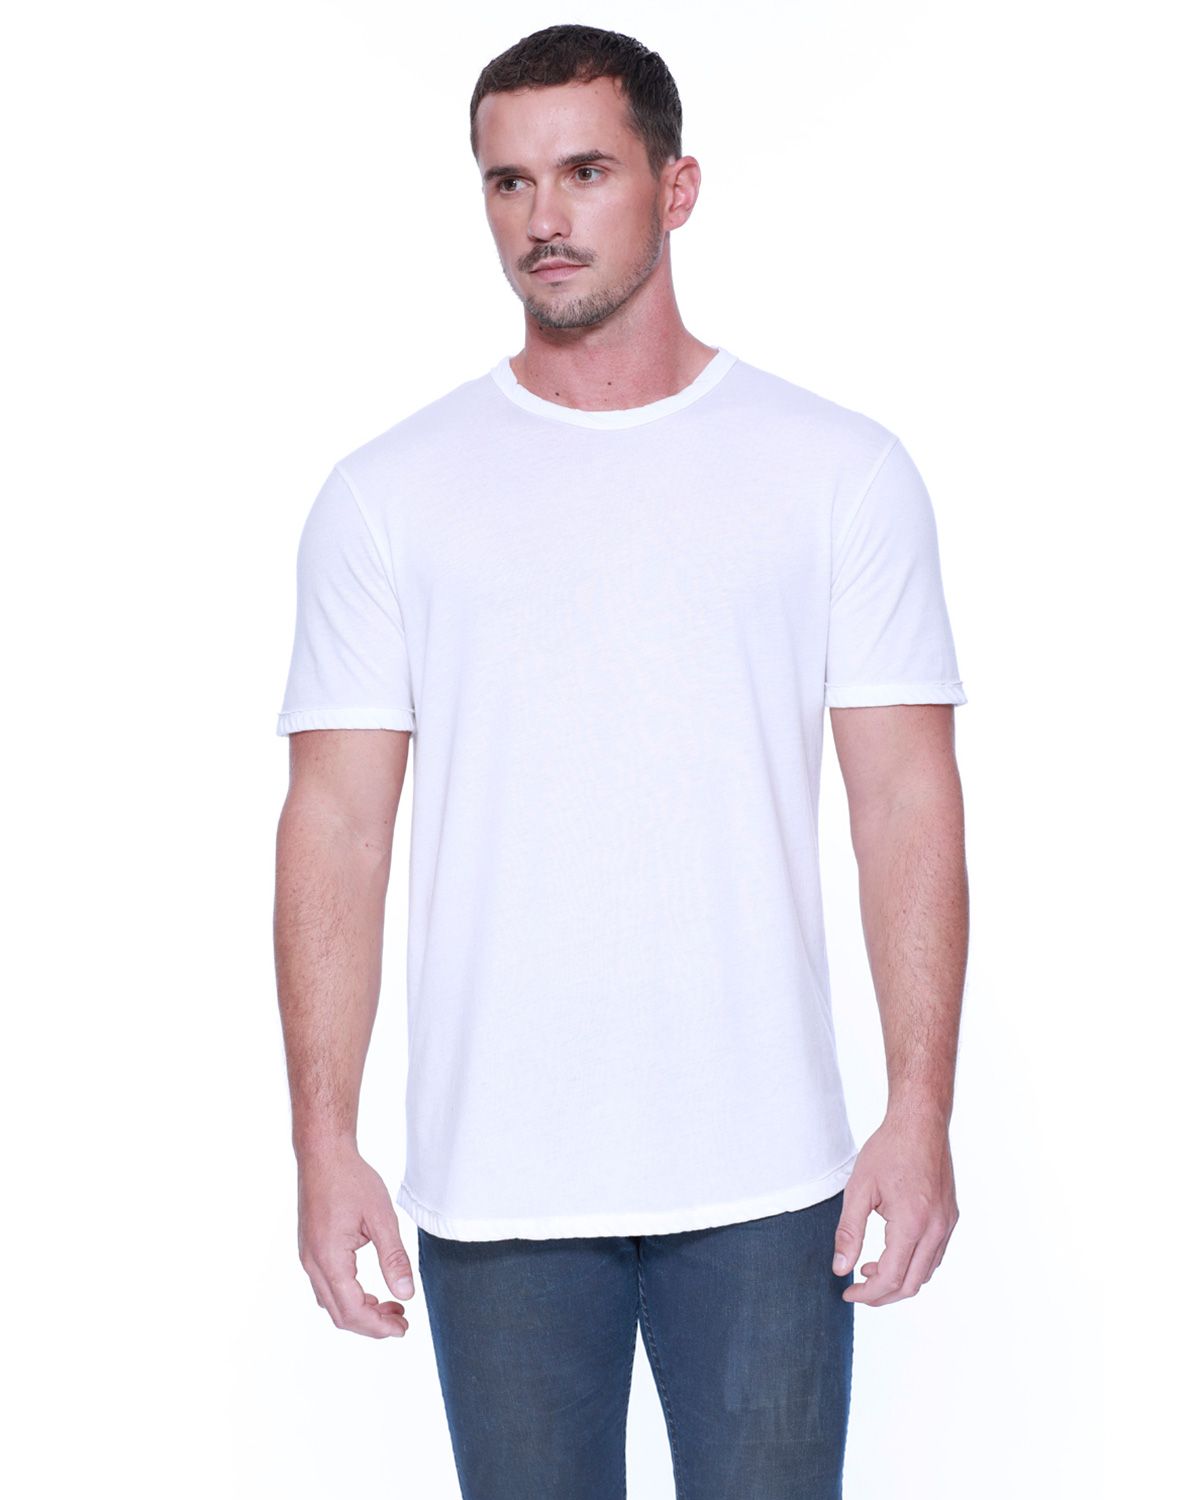 Startee St2820 Mens Cotton Modal Twisted T Shirt,Electric Dryer Connection Vs Gas